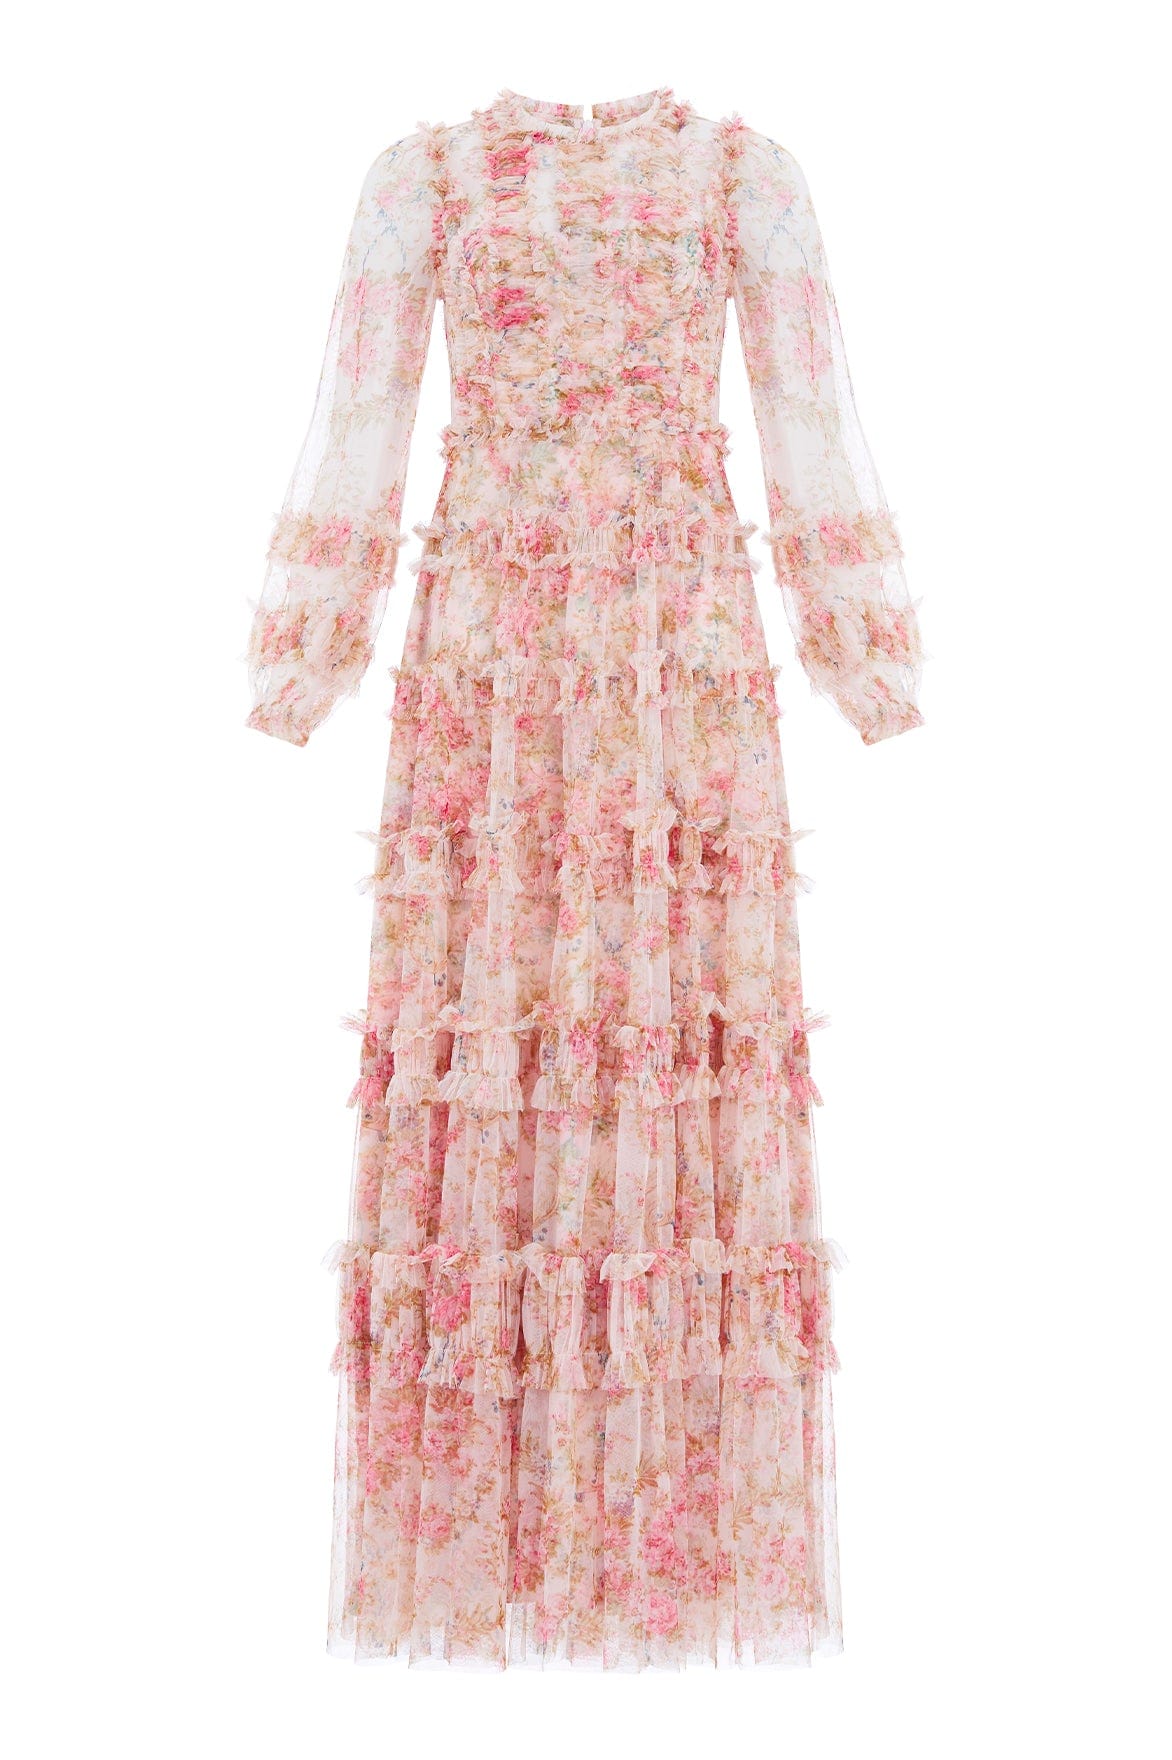 Floral Wreath Ruffle Gown – Pink | Needle & Thread